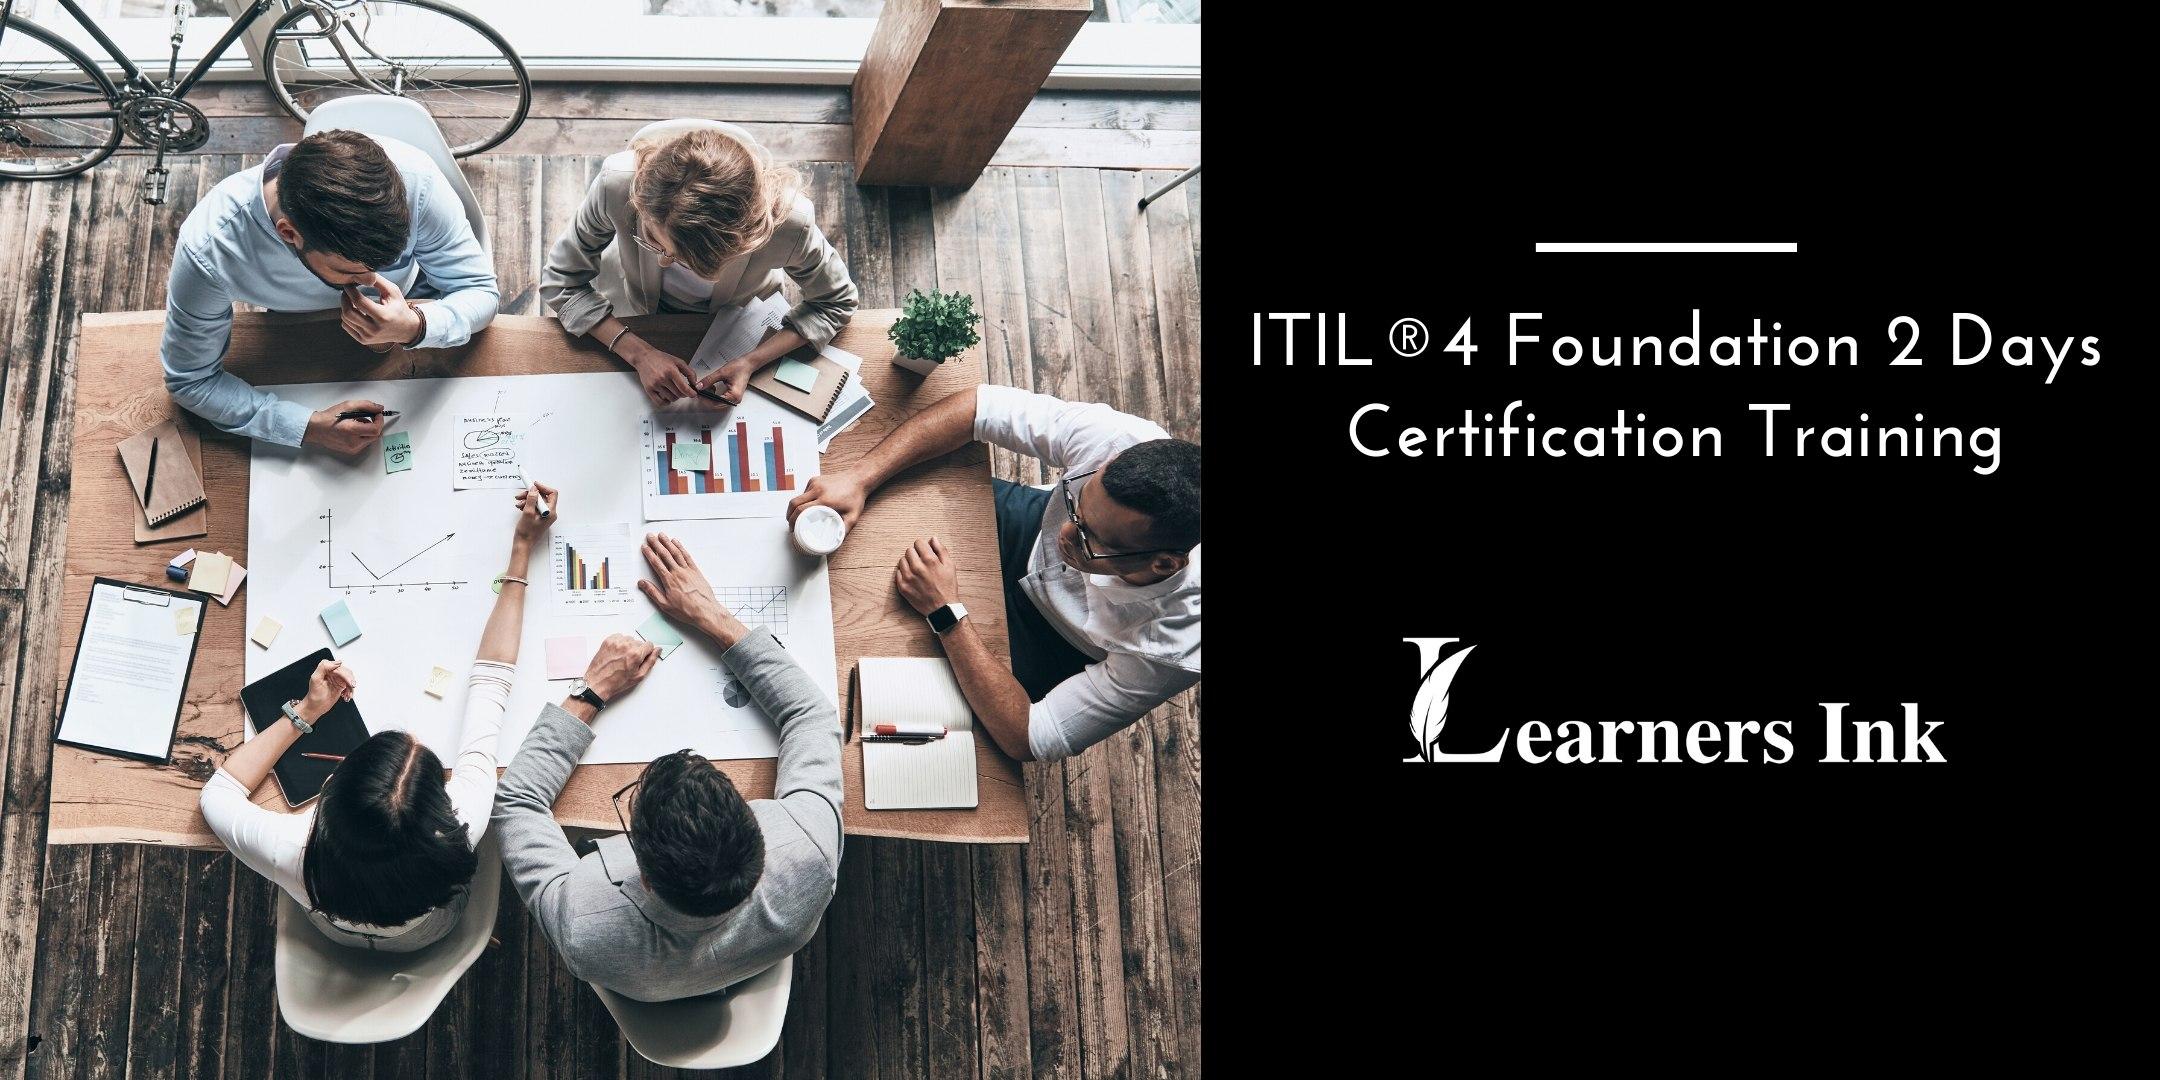 ITIL®4 Foundation 2 Days Certification Training in Baton Bouge